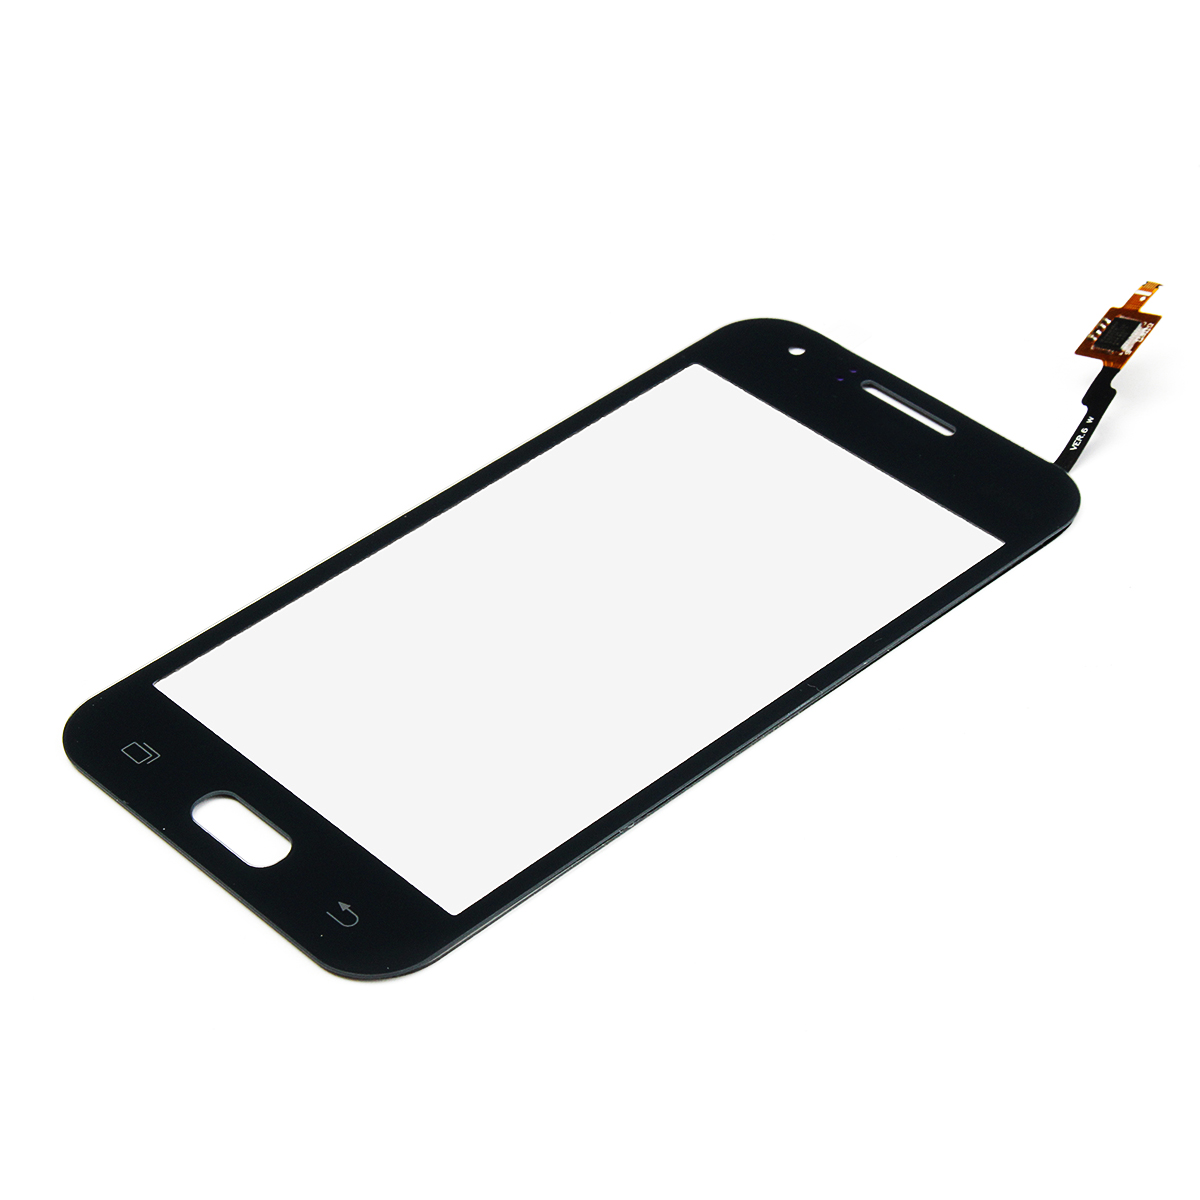 Touch-Screen-Digitizer-LCD-Display-Replacement-Part-amp-Repair-Tools--for-Samsung-Galaxy-J1-SM-J100-1207998